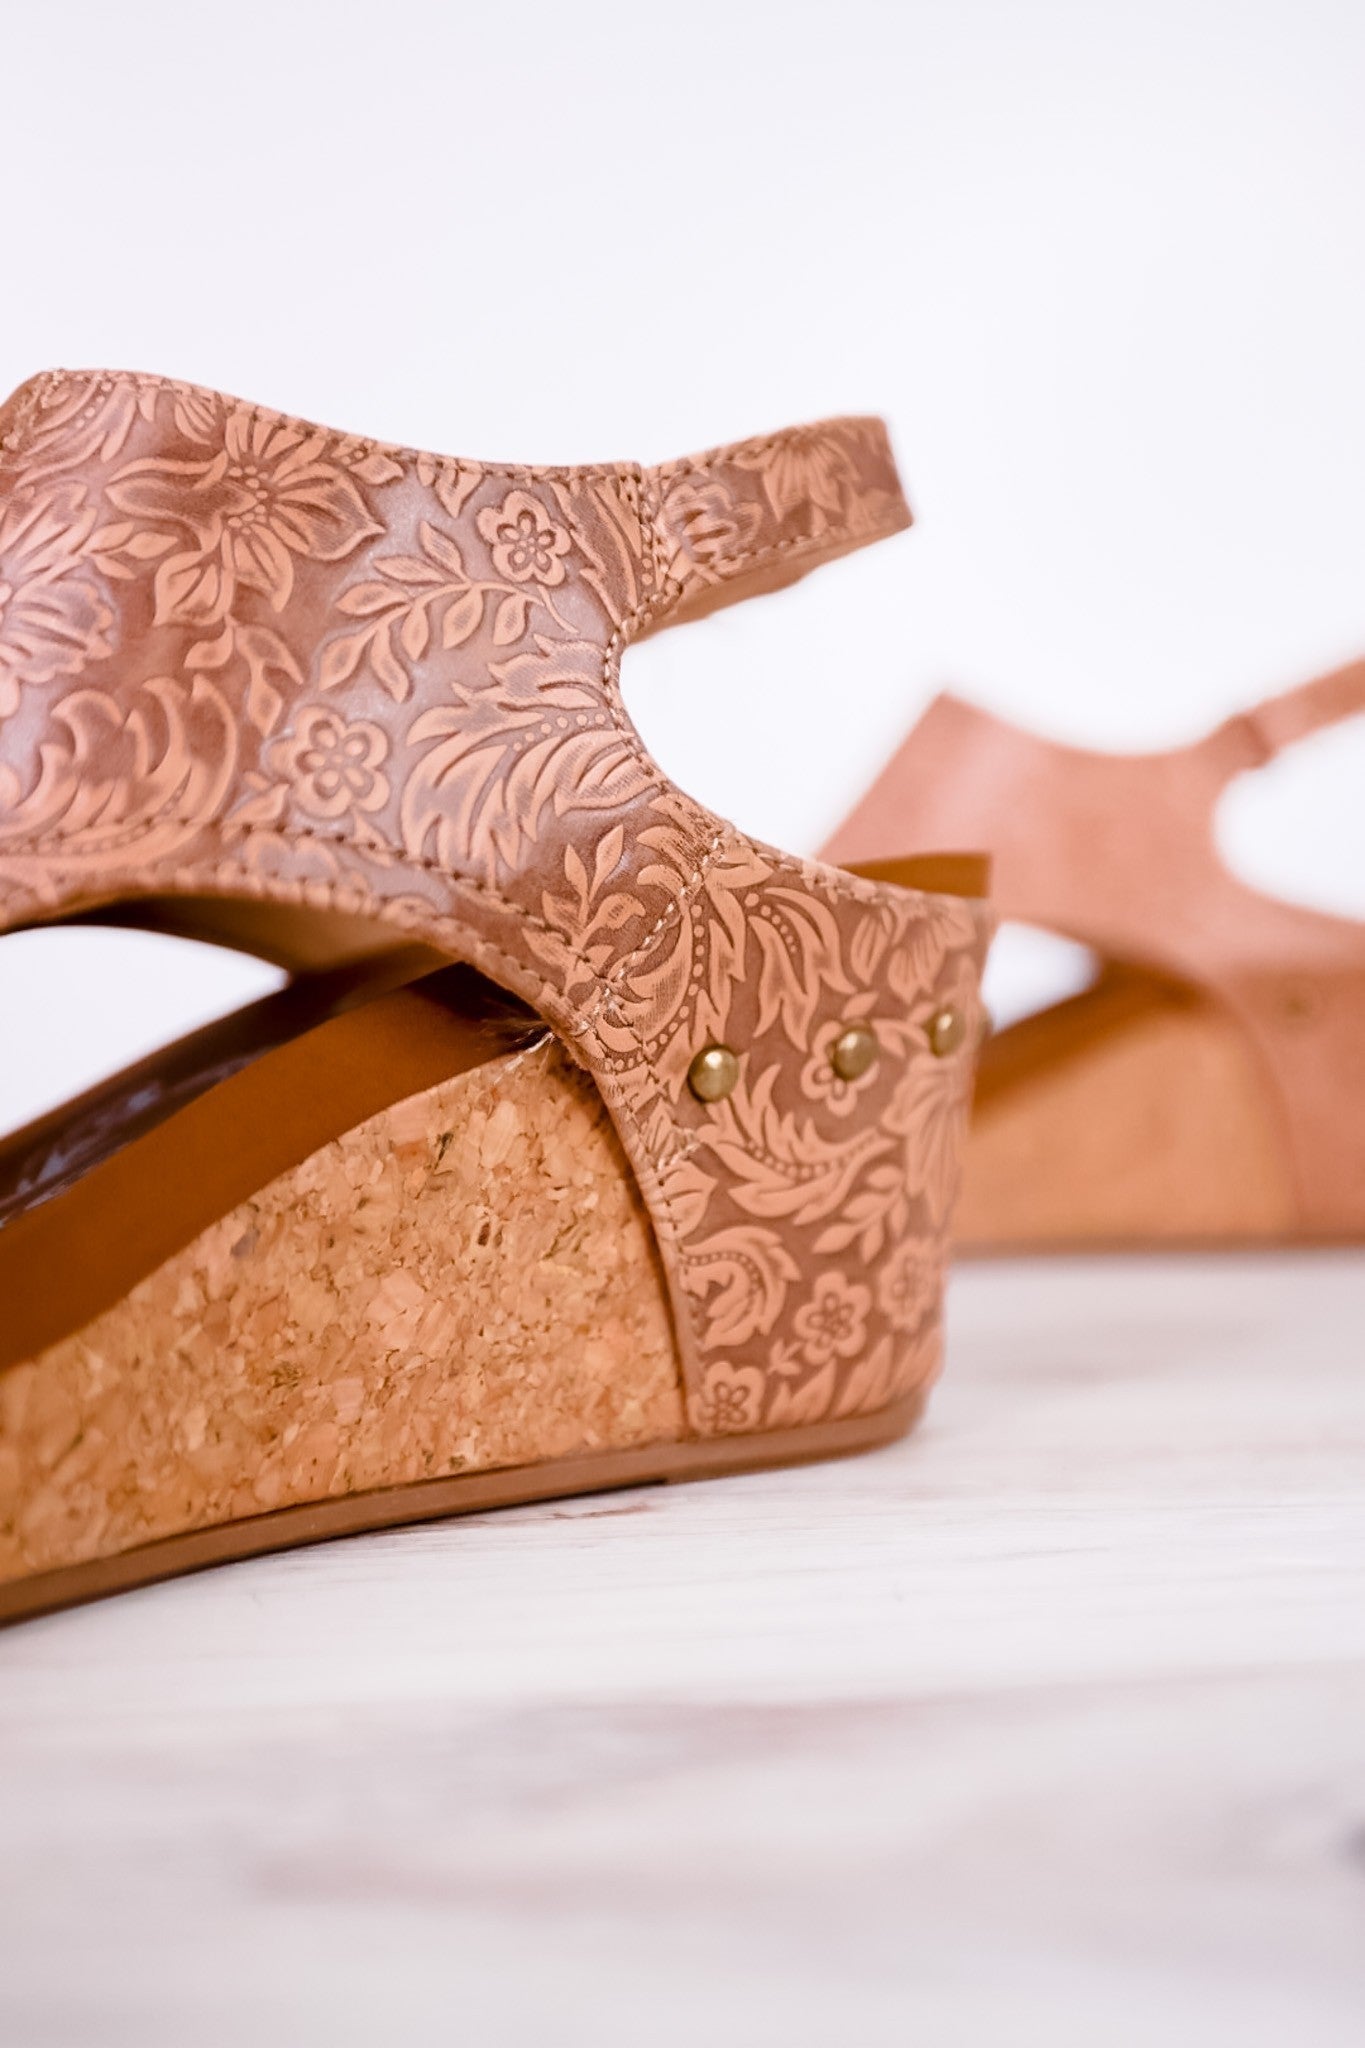 Nude Liberty Embroidered Wedge - Whiskey Skies